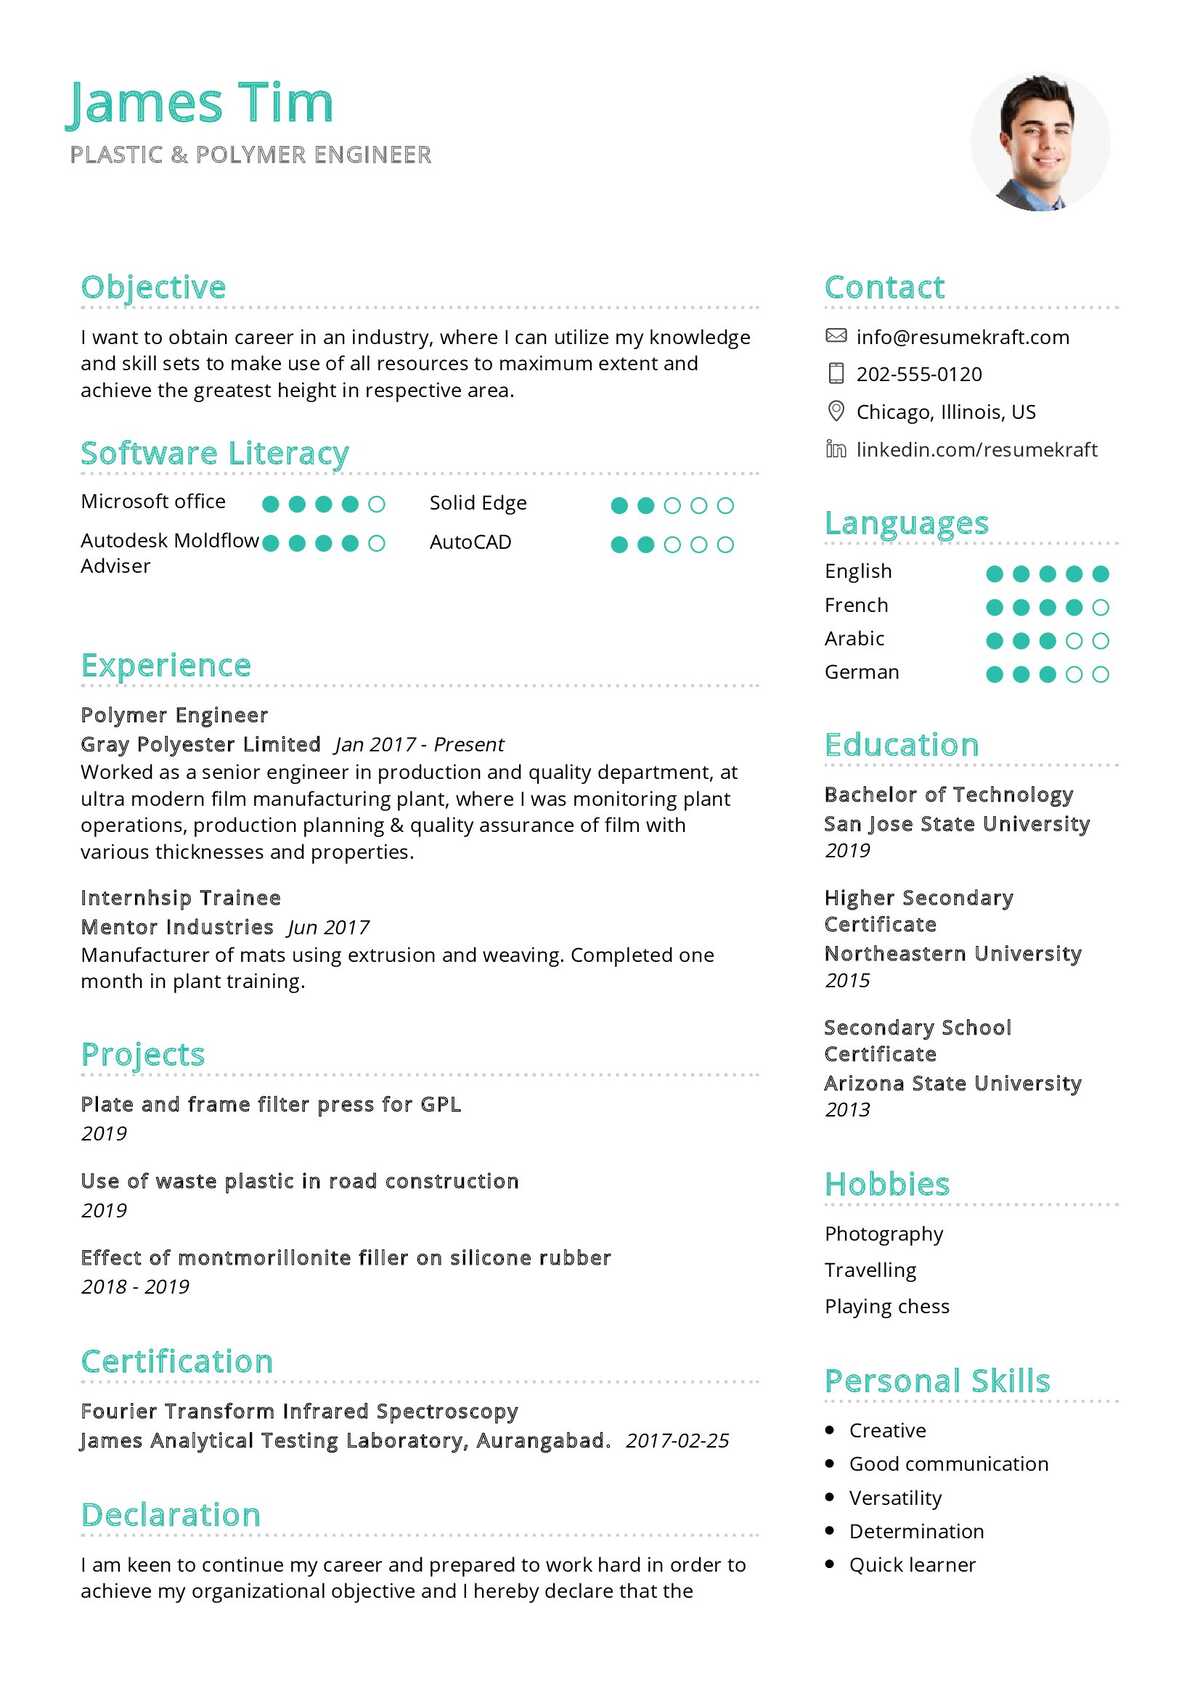 resume format for experienced plastic engineer